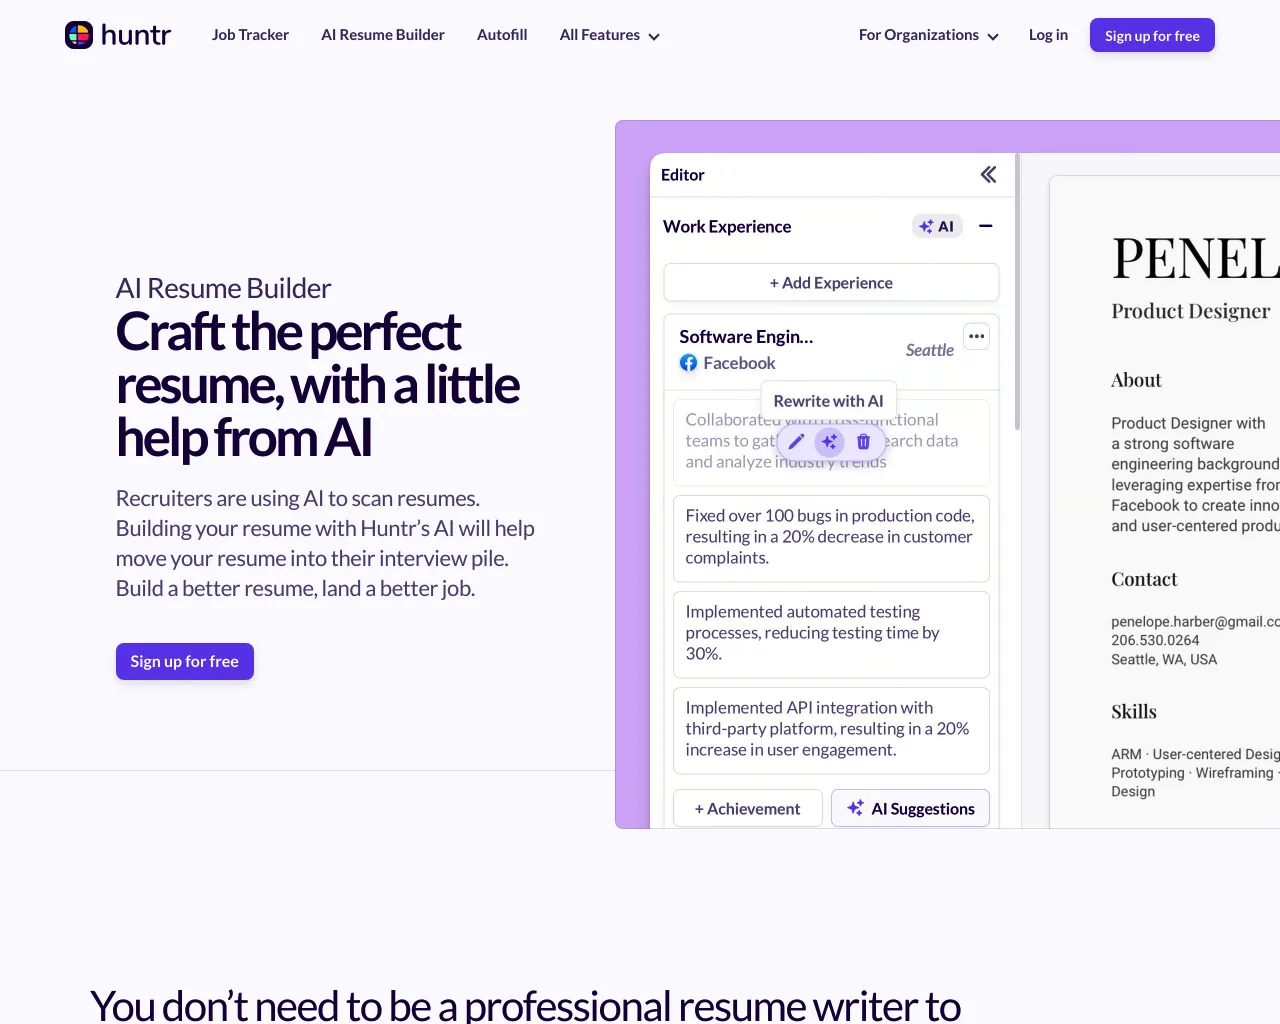 Craft the perfect resume, with a little help from AI